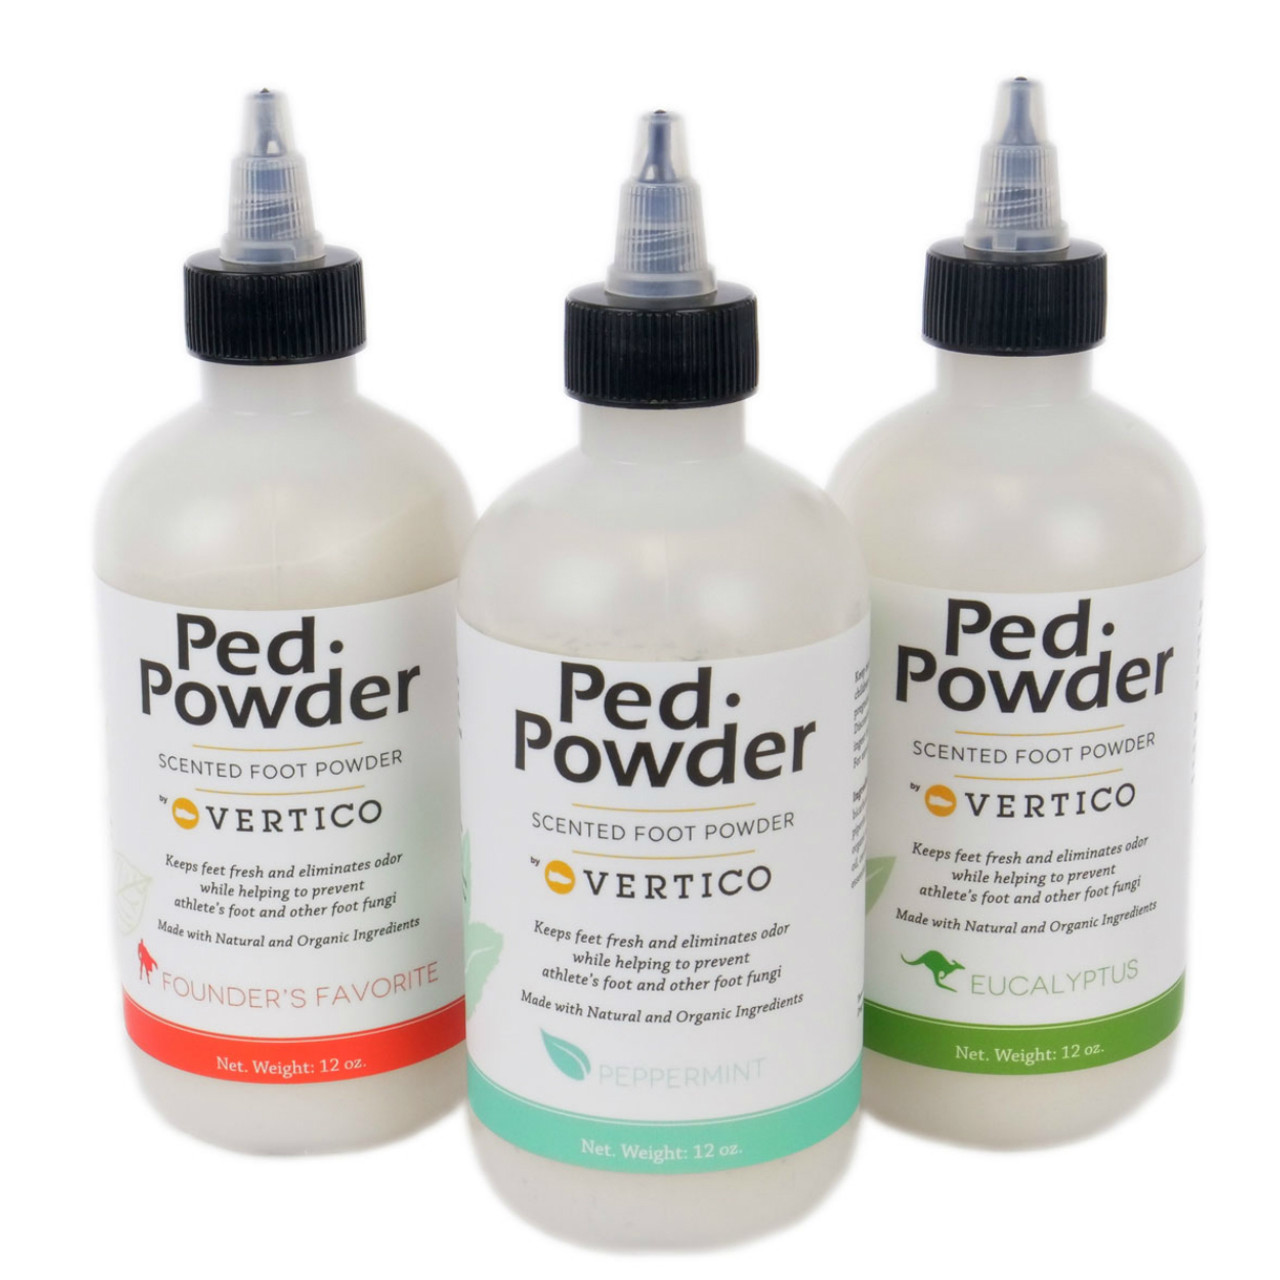 Vertico Ped-Powder | The Best Foot And 